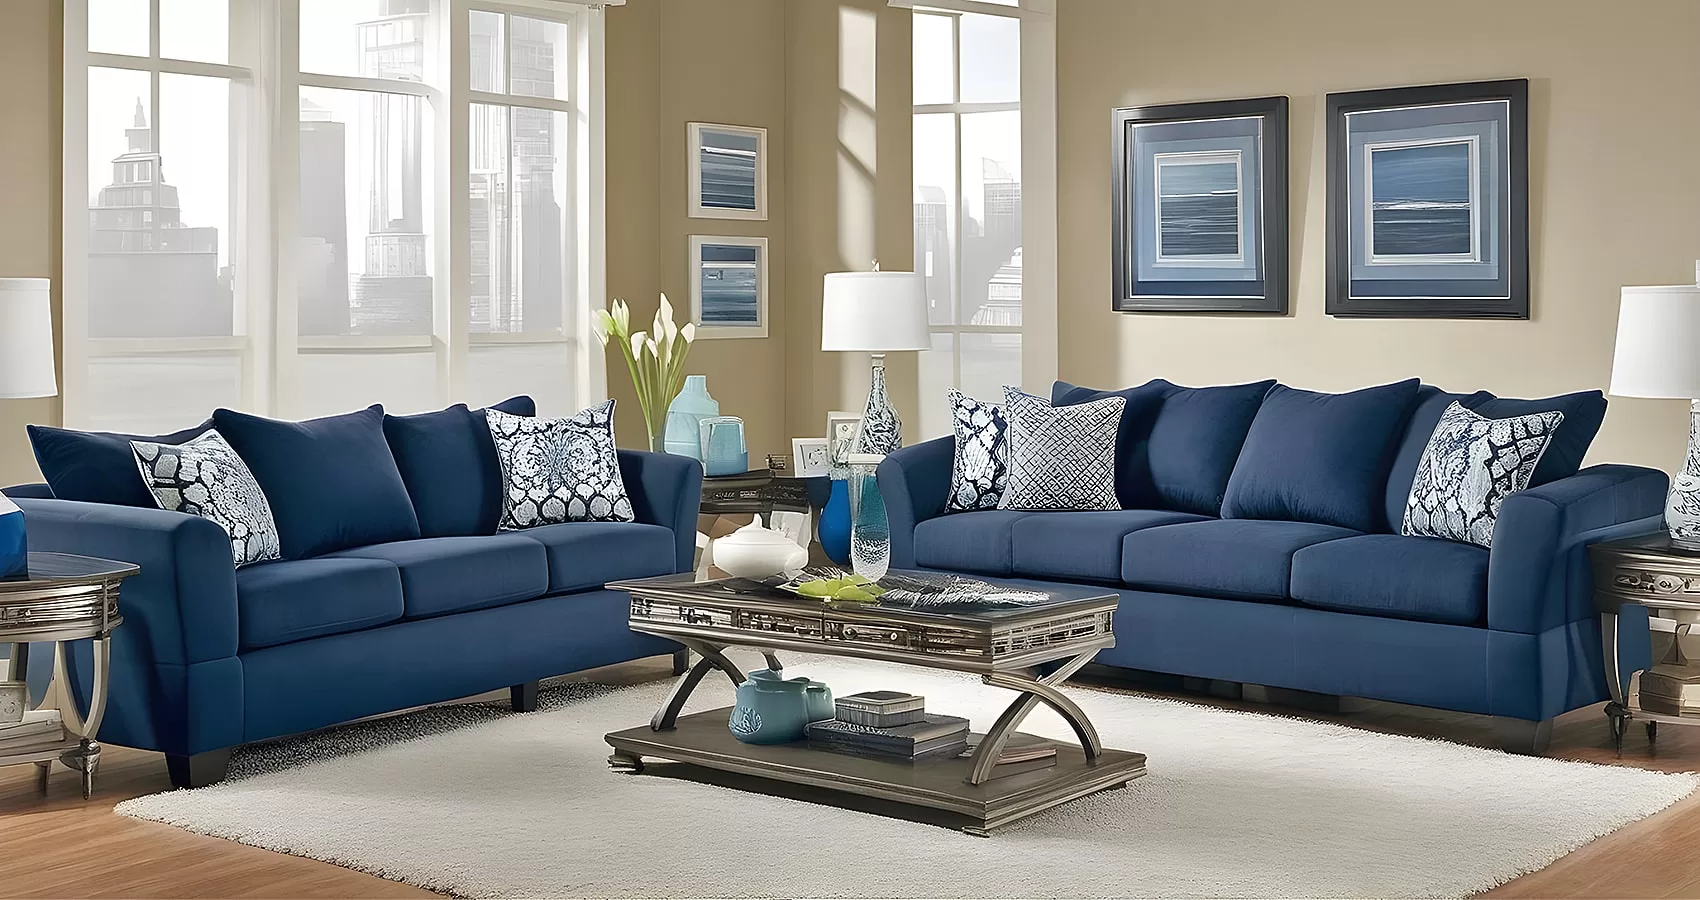 Decorating Around a Navy Blue Sofa | Navy Blue Couch Living Room Ideas